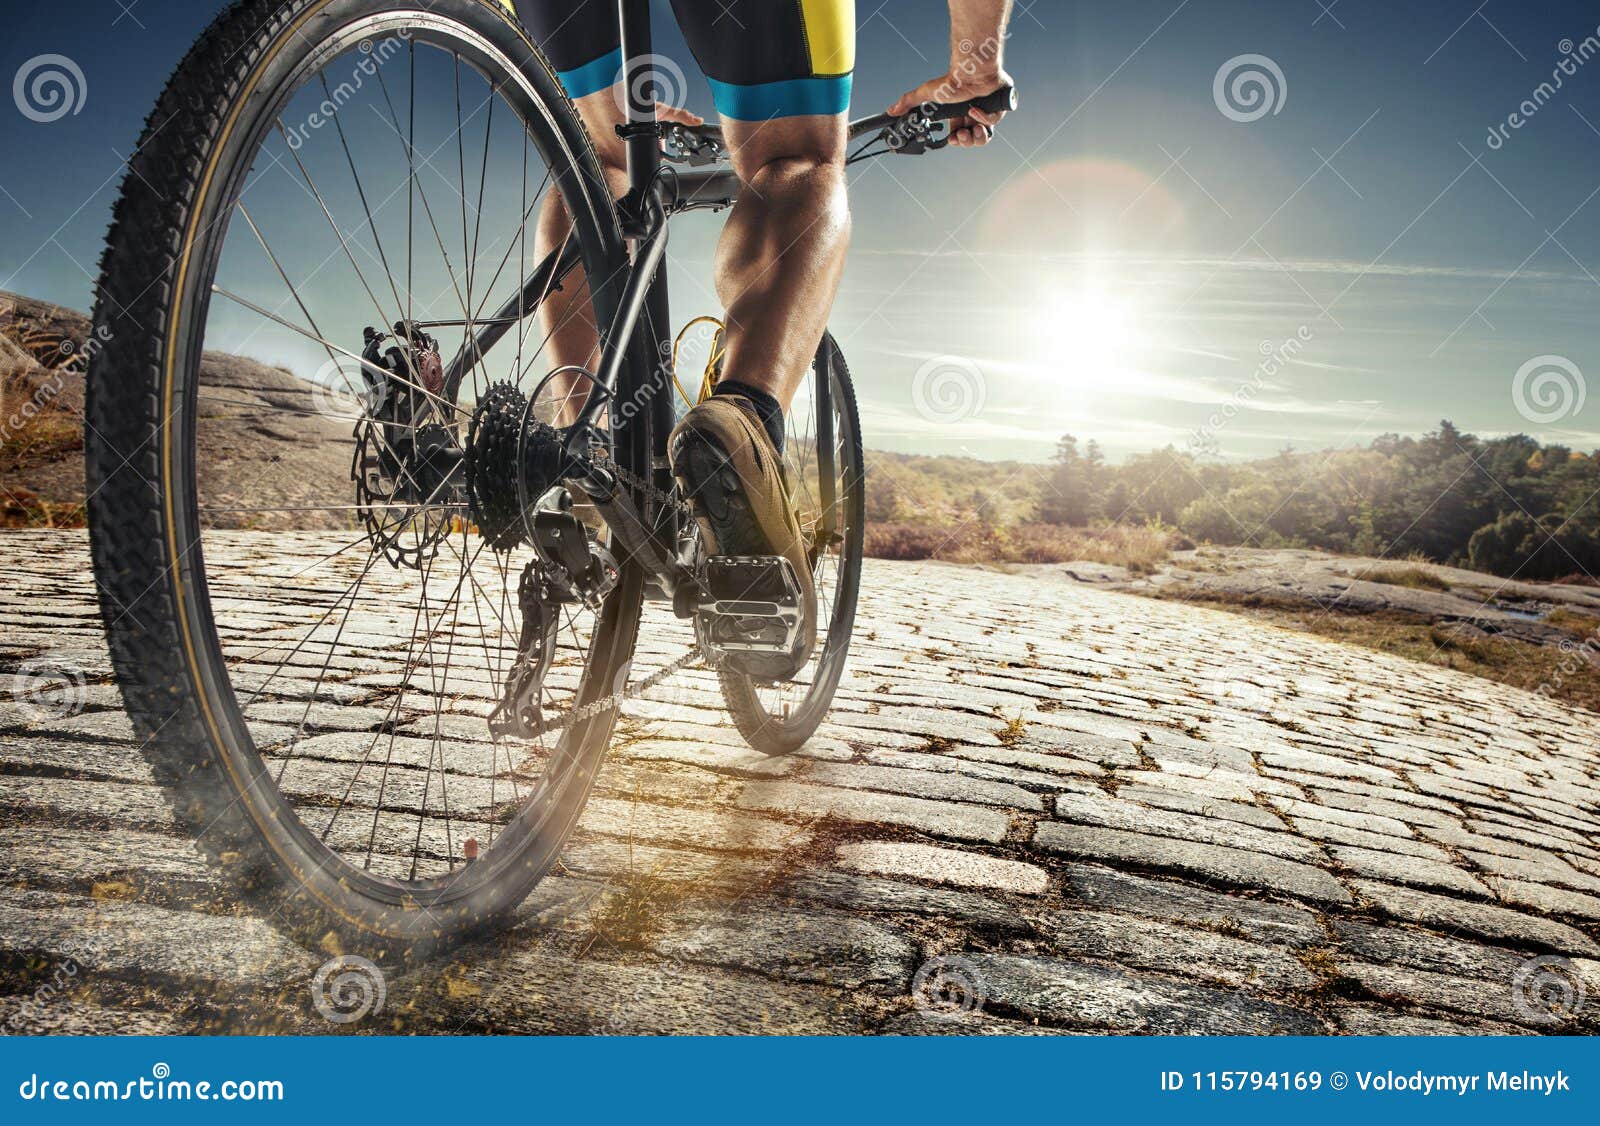 detail of cyclist man feet riding mountain bike on outdoor trail on country road